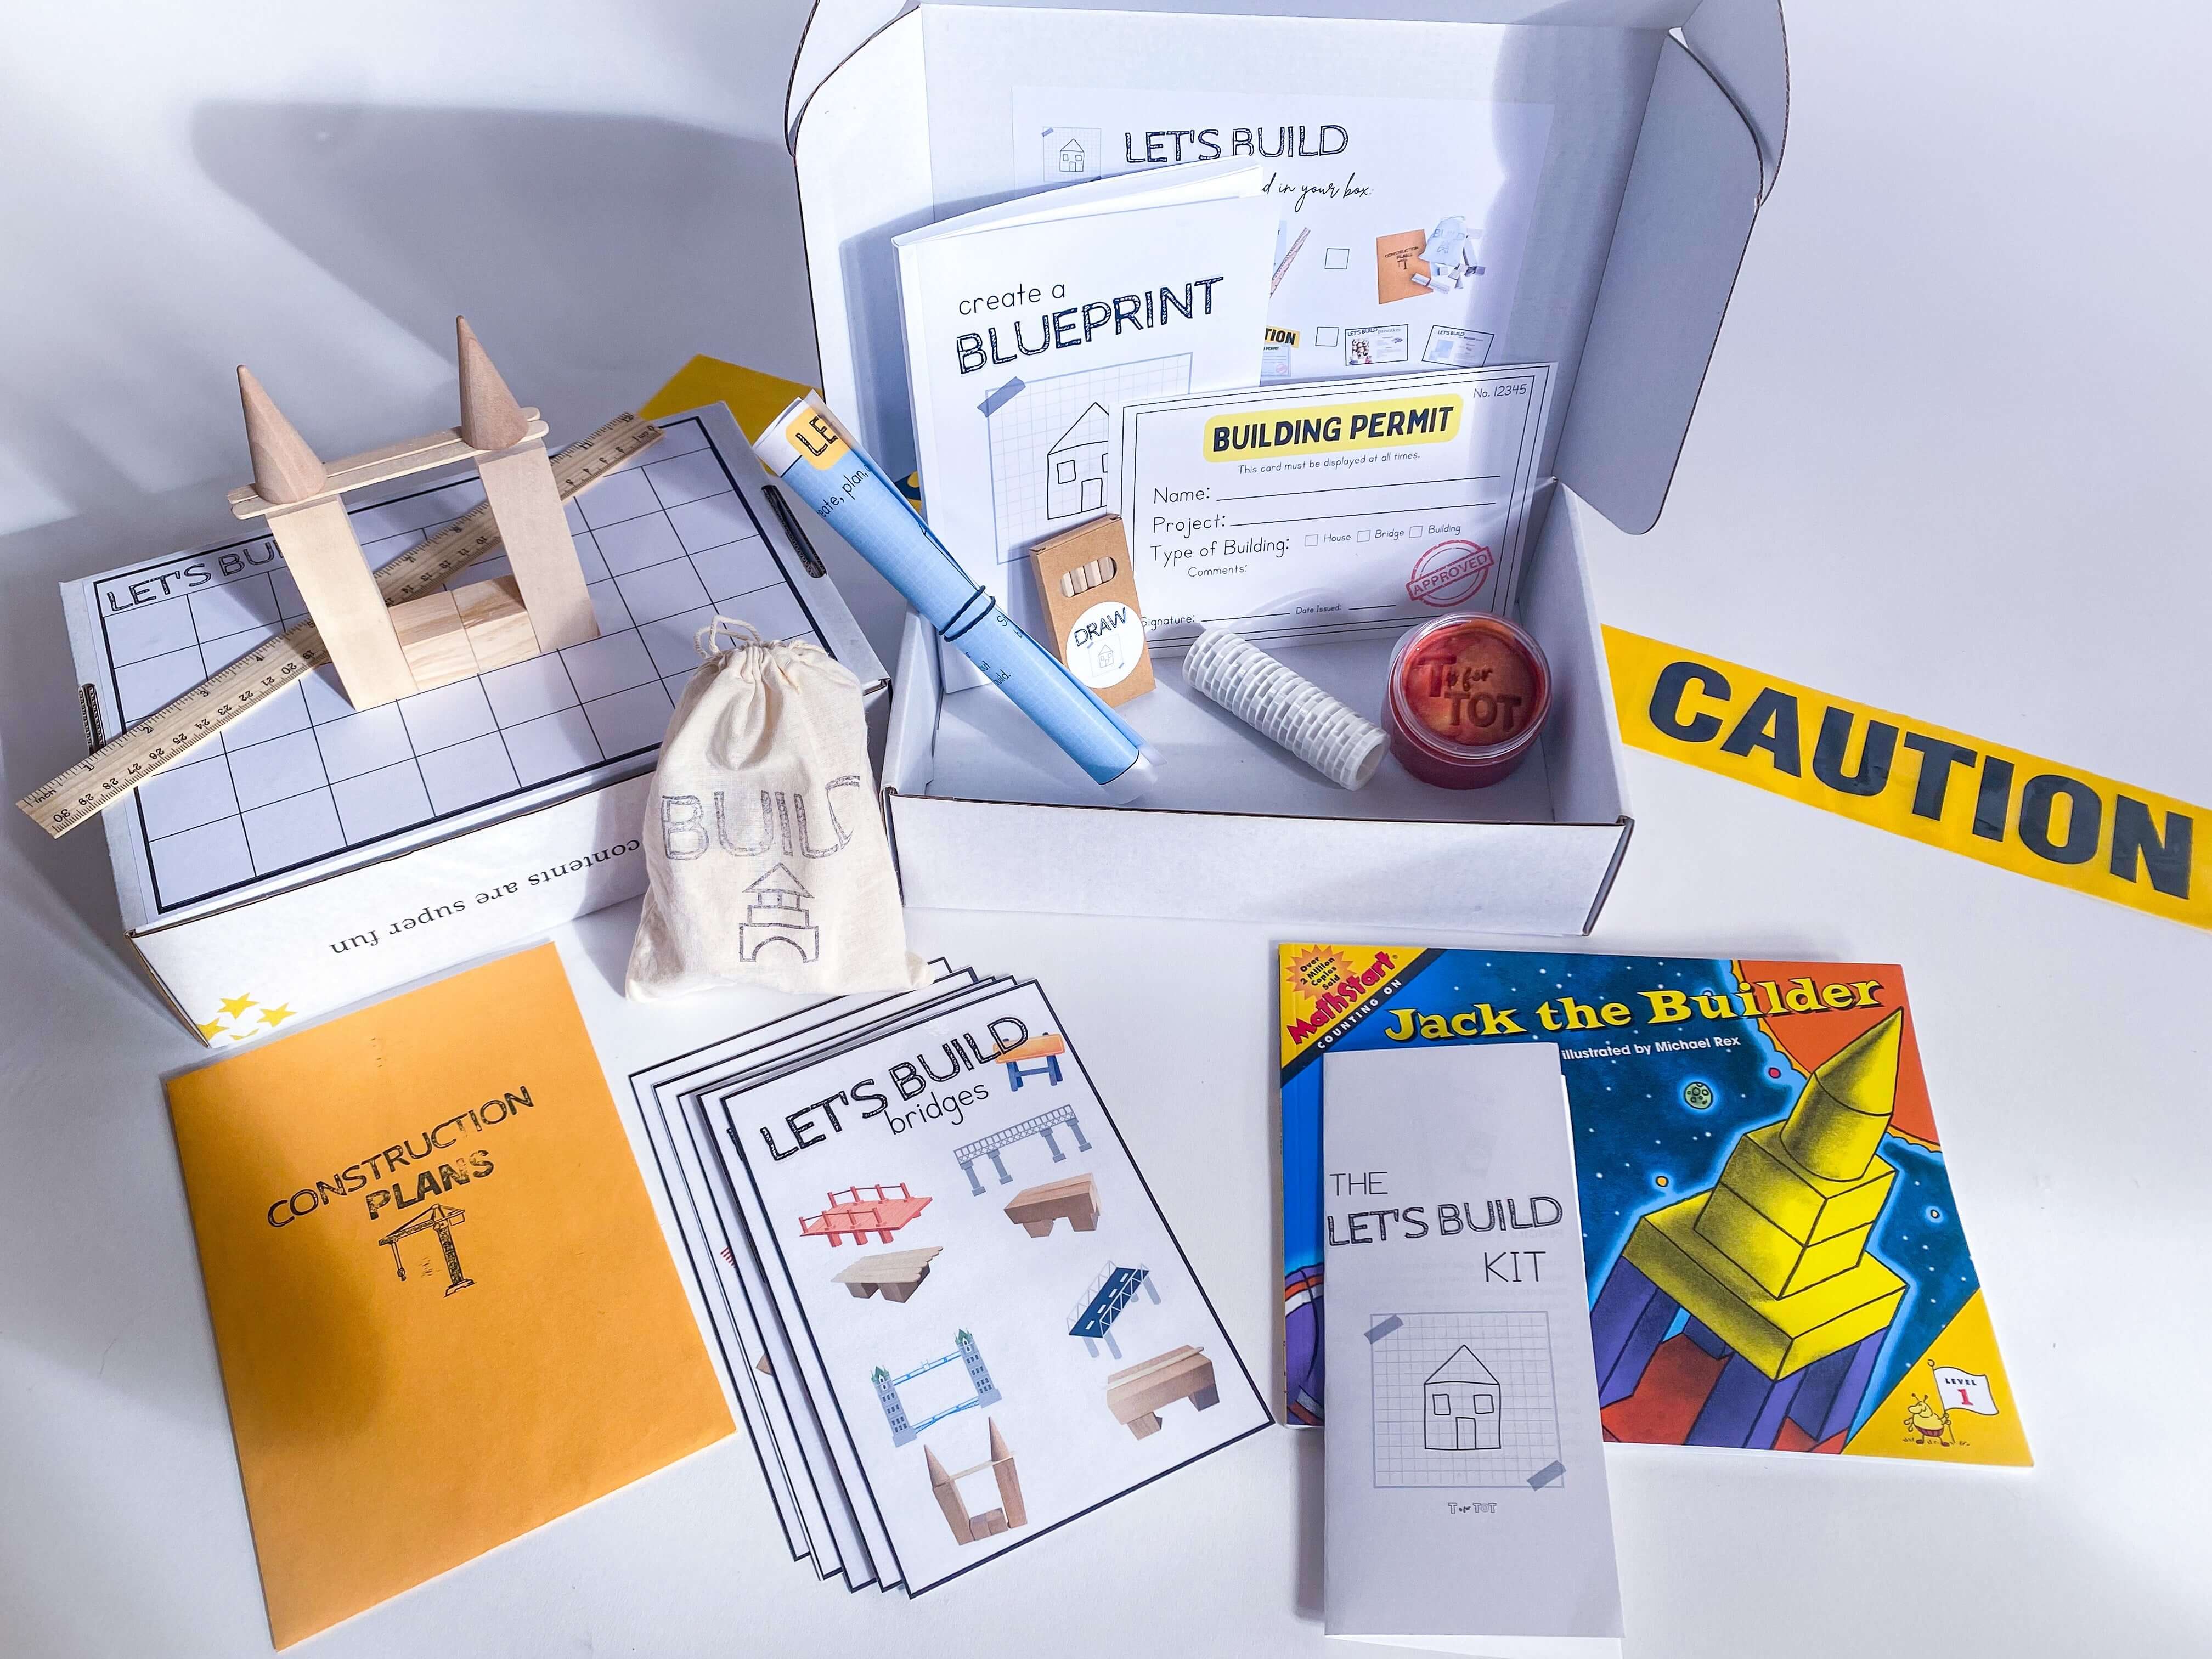 Construction play kit for kids with homemade non-toxic playdough, brick playdough roller, and building blocks. Features construction plans for educational play, role play items like blueprint and caution tape, and a blueprint journal with colored pencils and ruler.